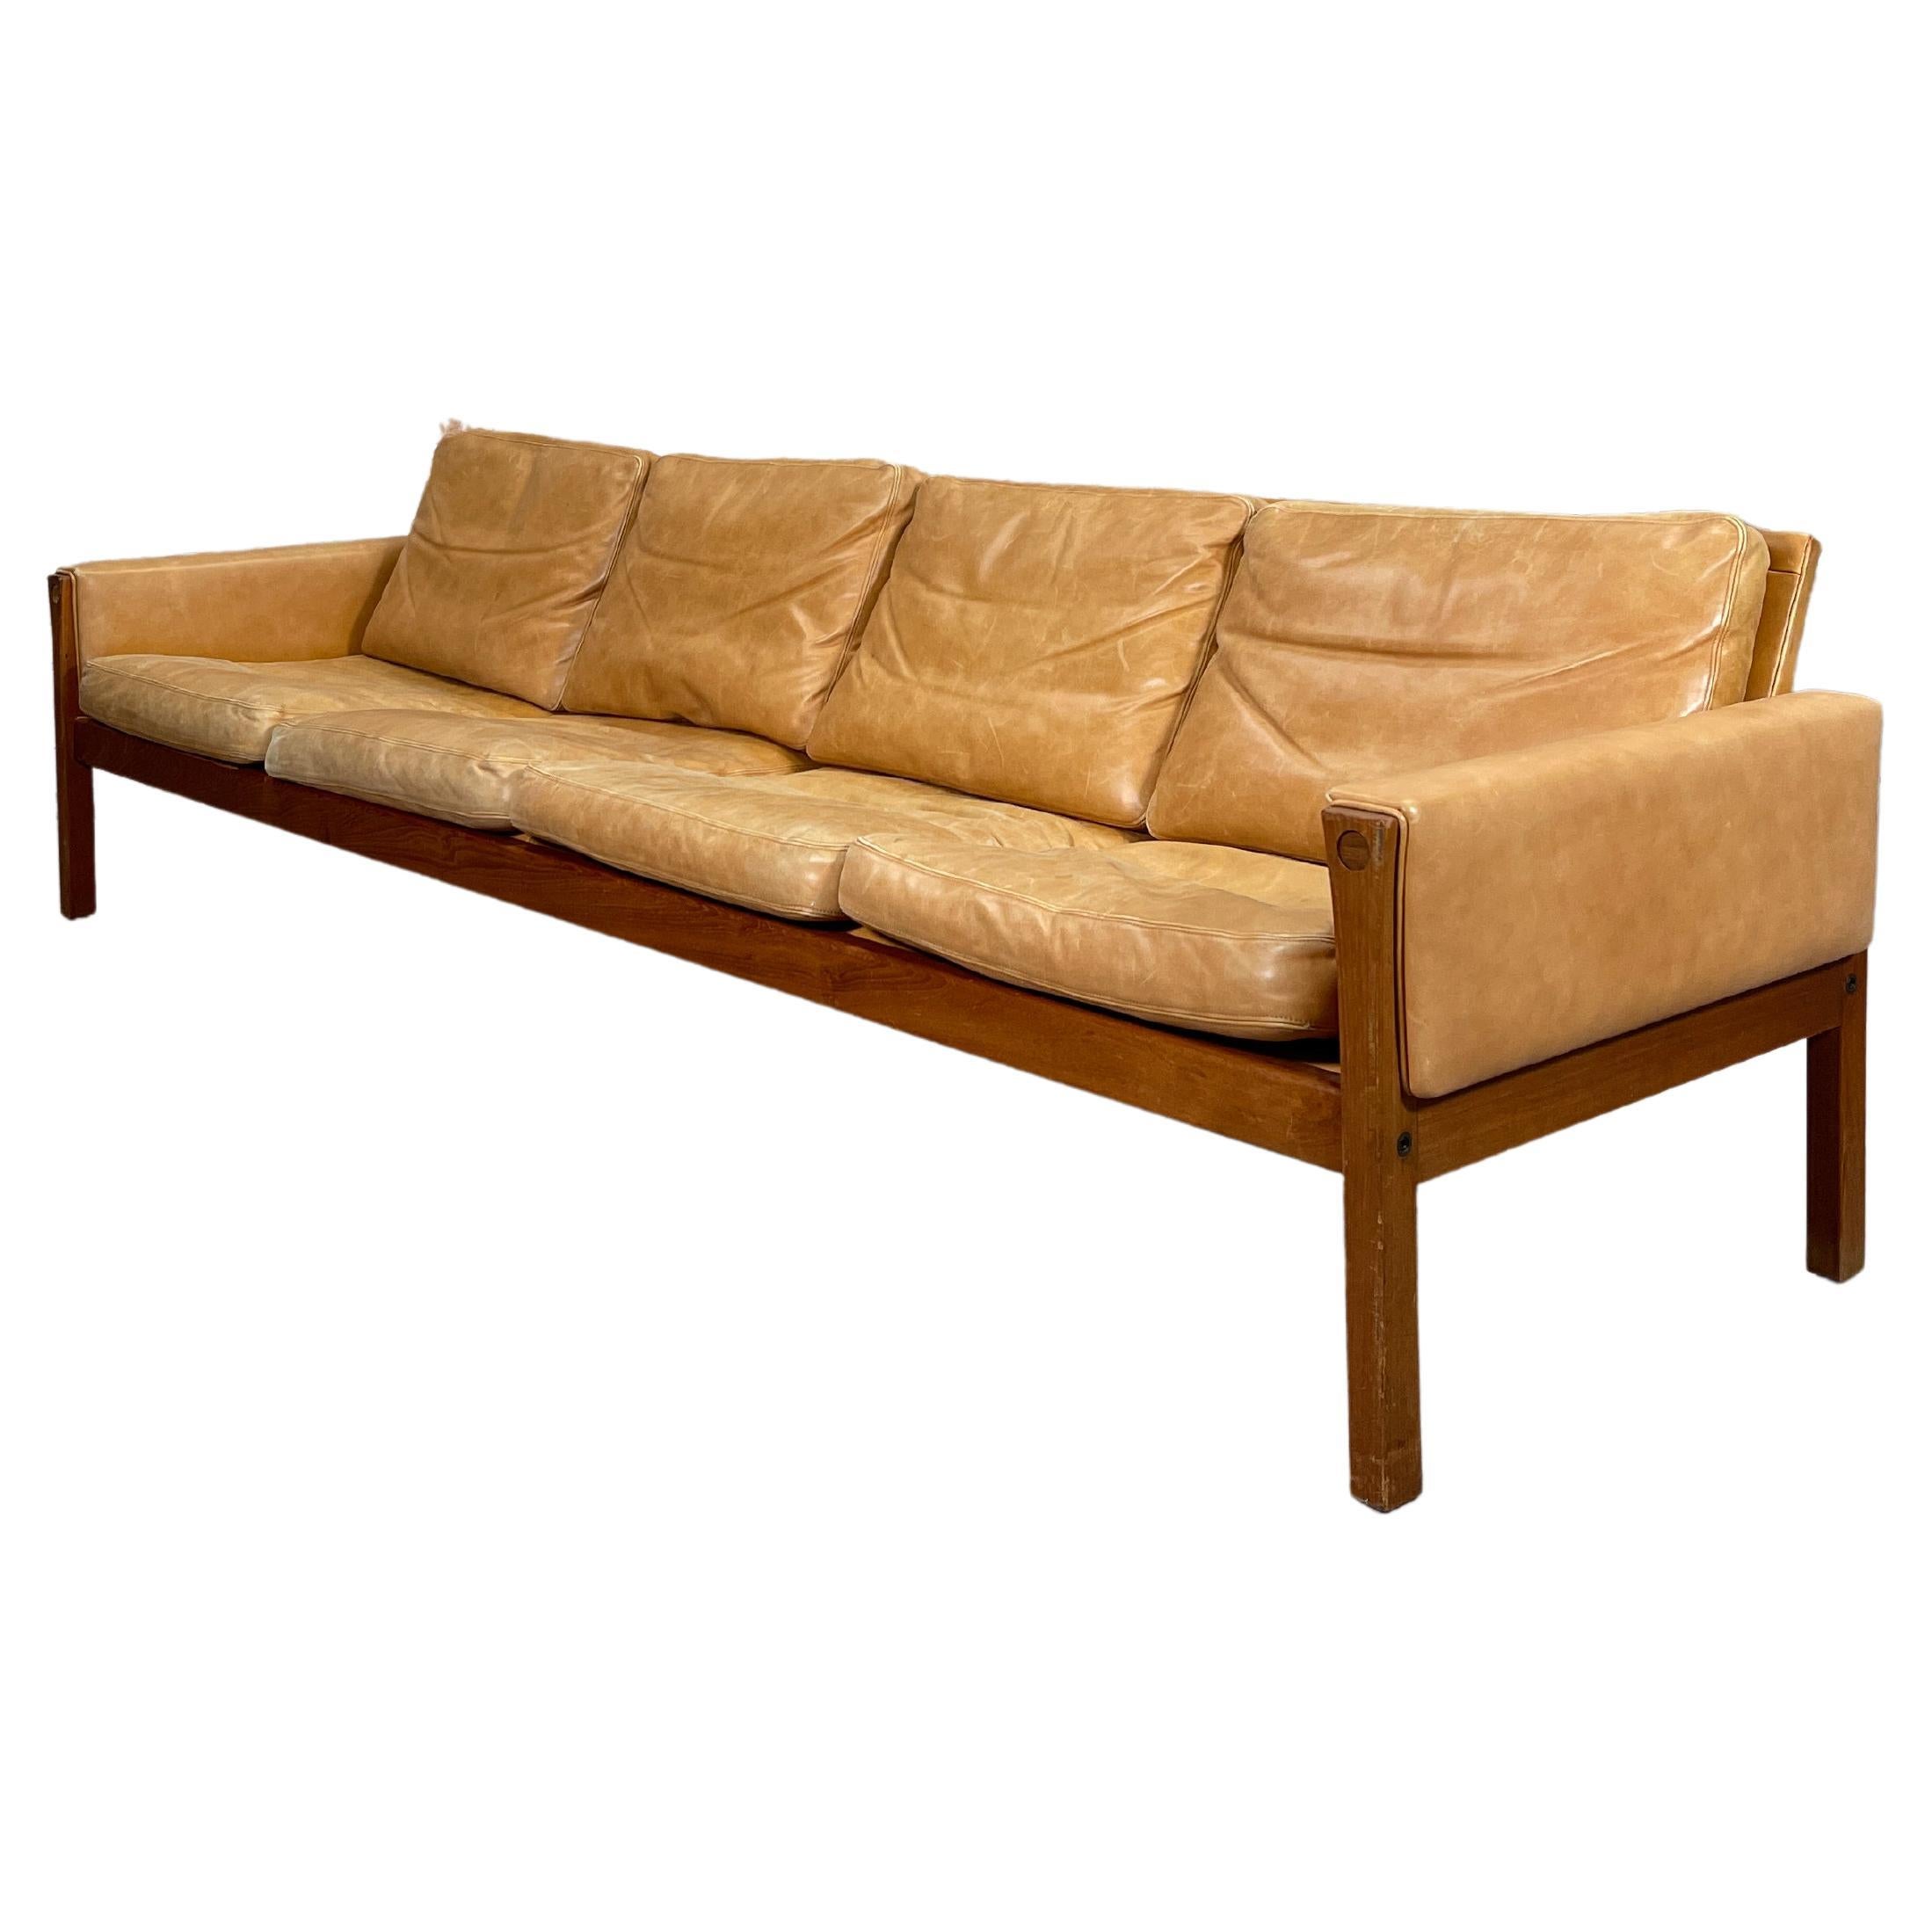 Rare Hans Wegner AP62 / 4 sofa by AP Stolen in Rosewood and Leather